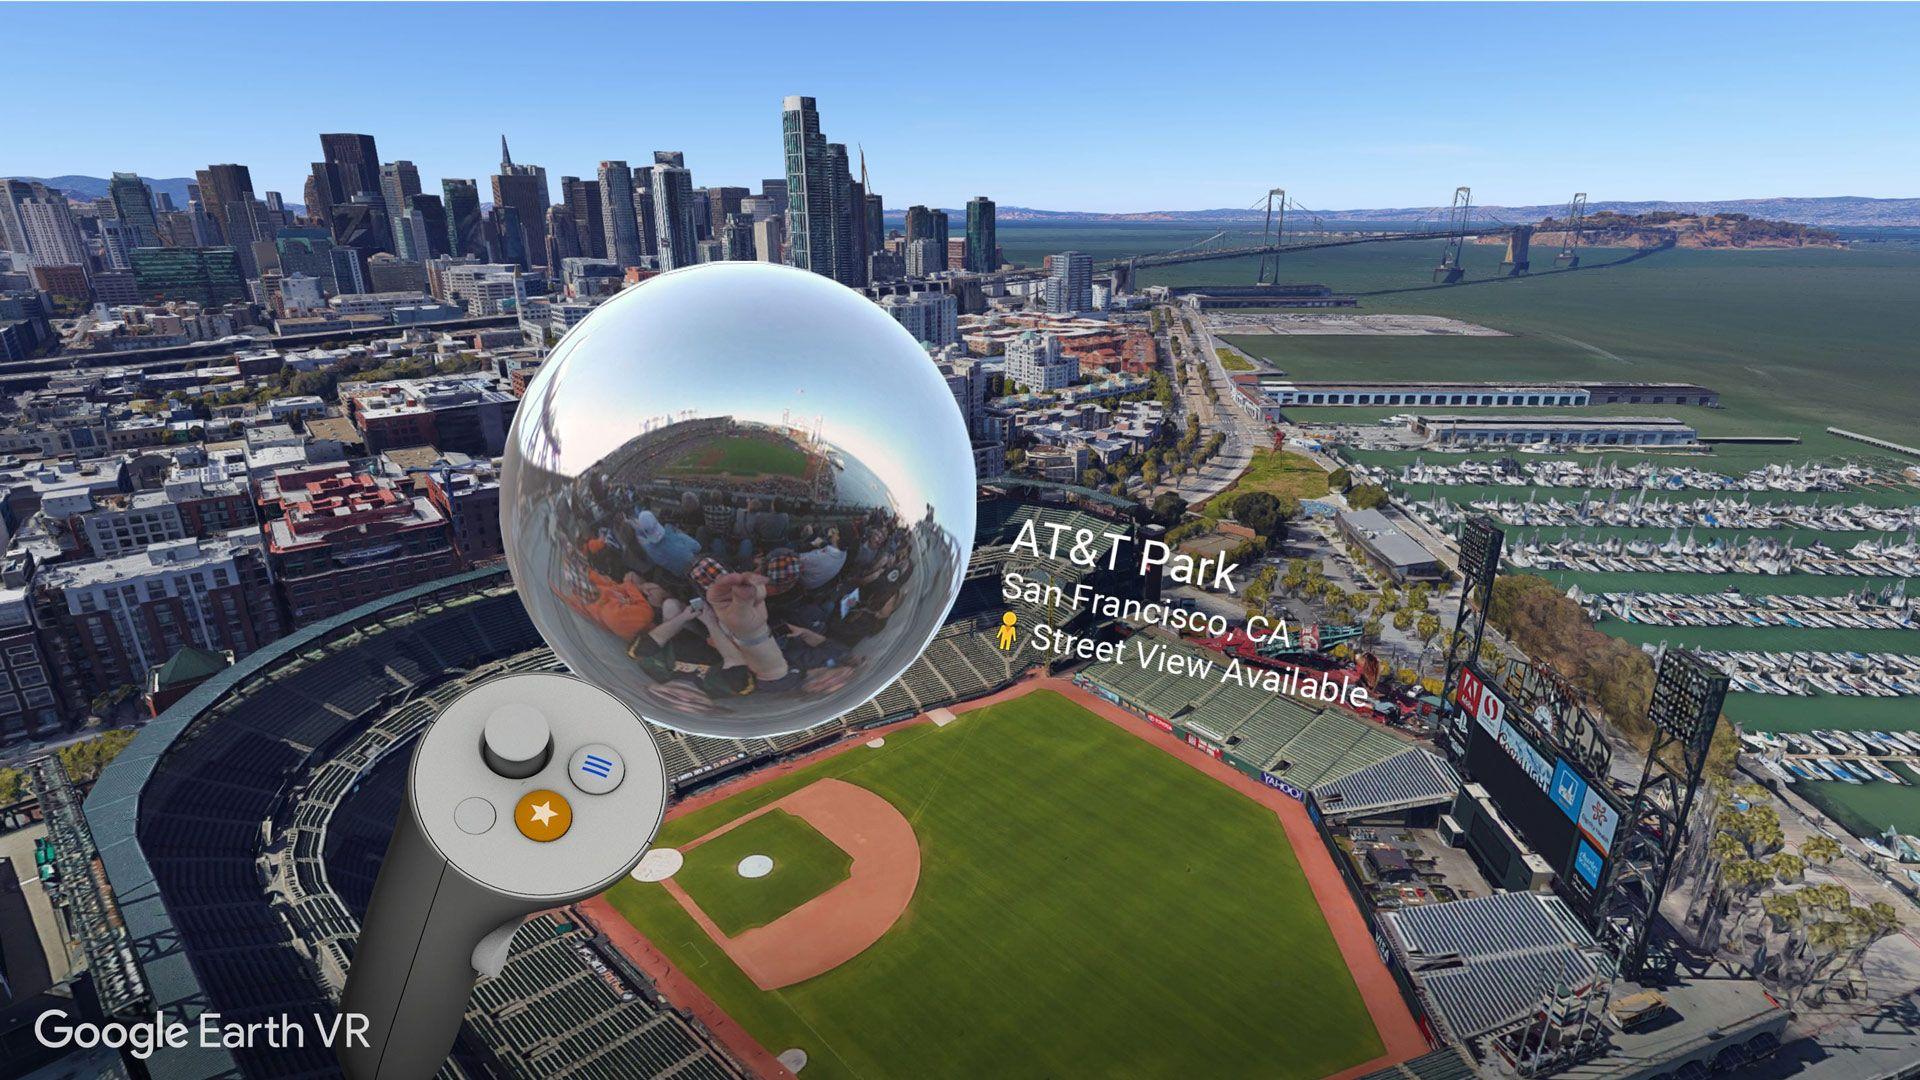 Google Earth VR Logo - Google's Massive Street View Library Now Available in 'Google Earth VR'